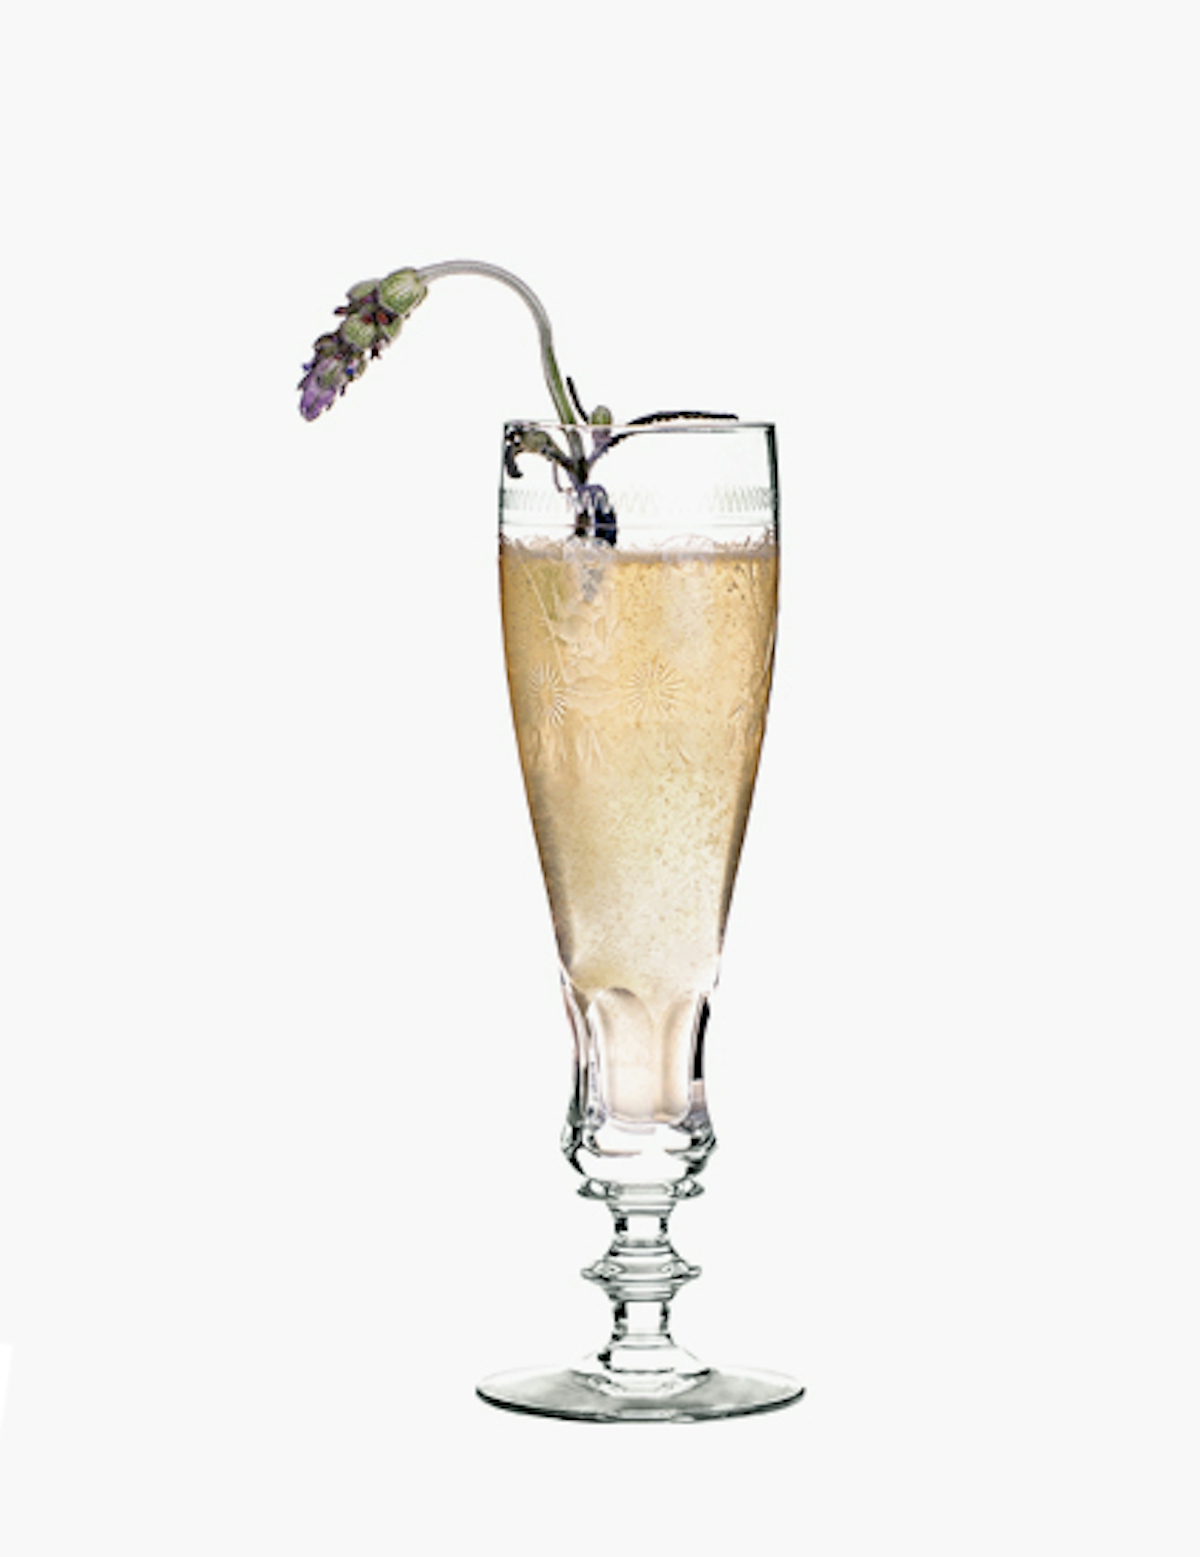 Provence Champagne Cocktail Recipes – Summer Cocktail Recipes – LuxDeco.com Style Guide – Shop Luxury Glassware at LuxDeco.com